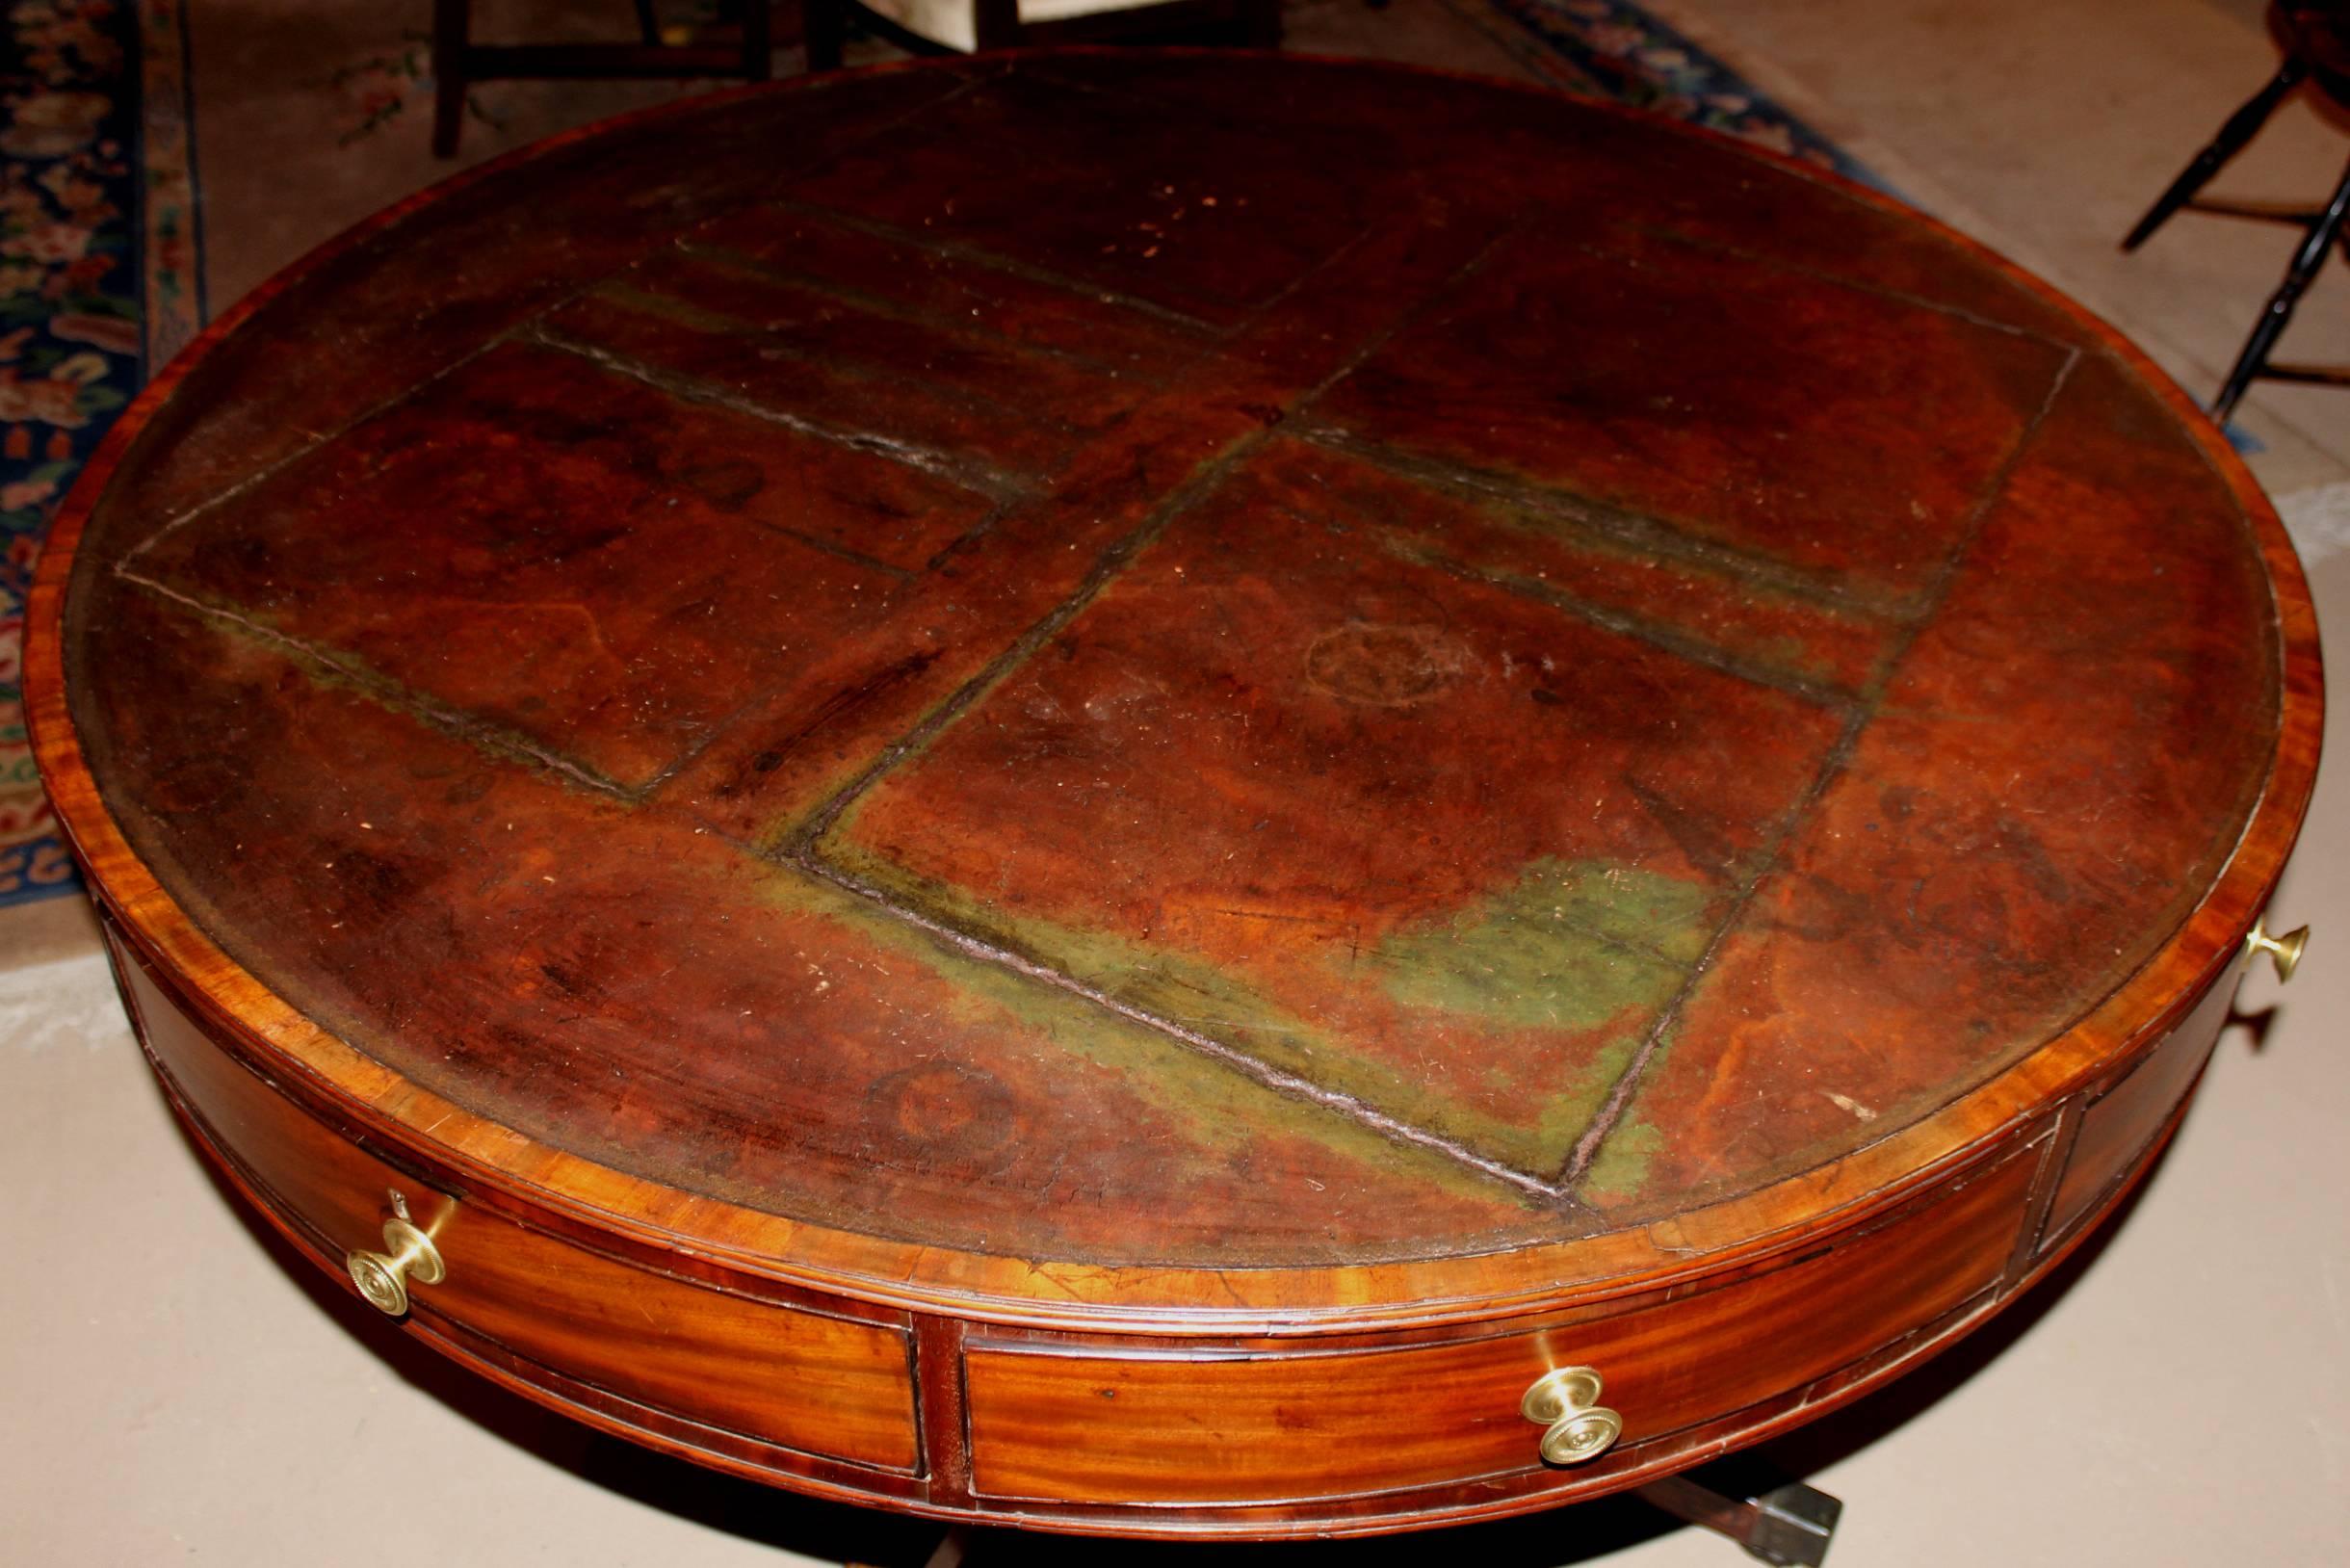 A wonderful English Georgian mahogany eight-drawer drum table with its original leather top, supported by a turned pedestal with four splayed legs, terminating with brass feet on casters. The maker’s name “A. Solomon, 59 Gt. Queen St.” is incised on